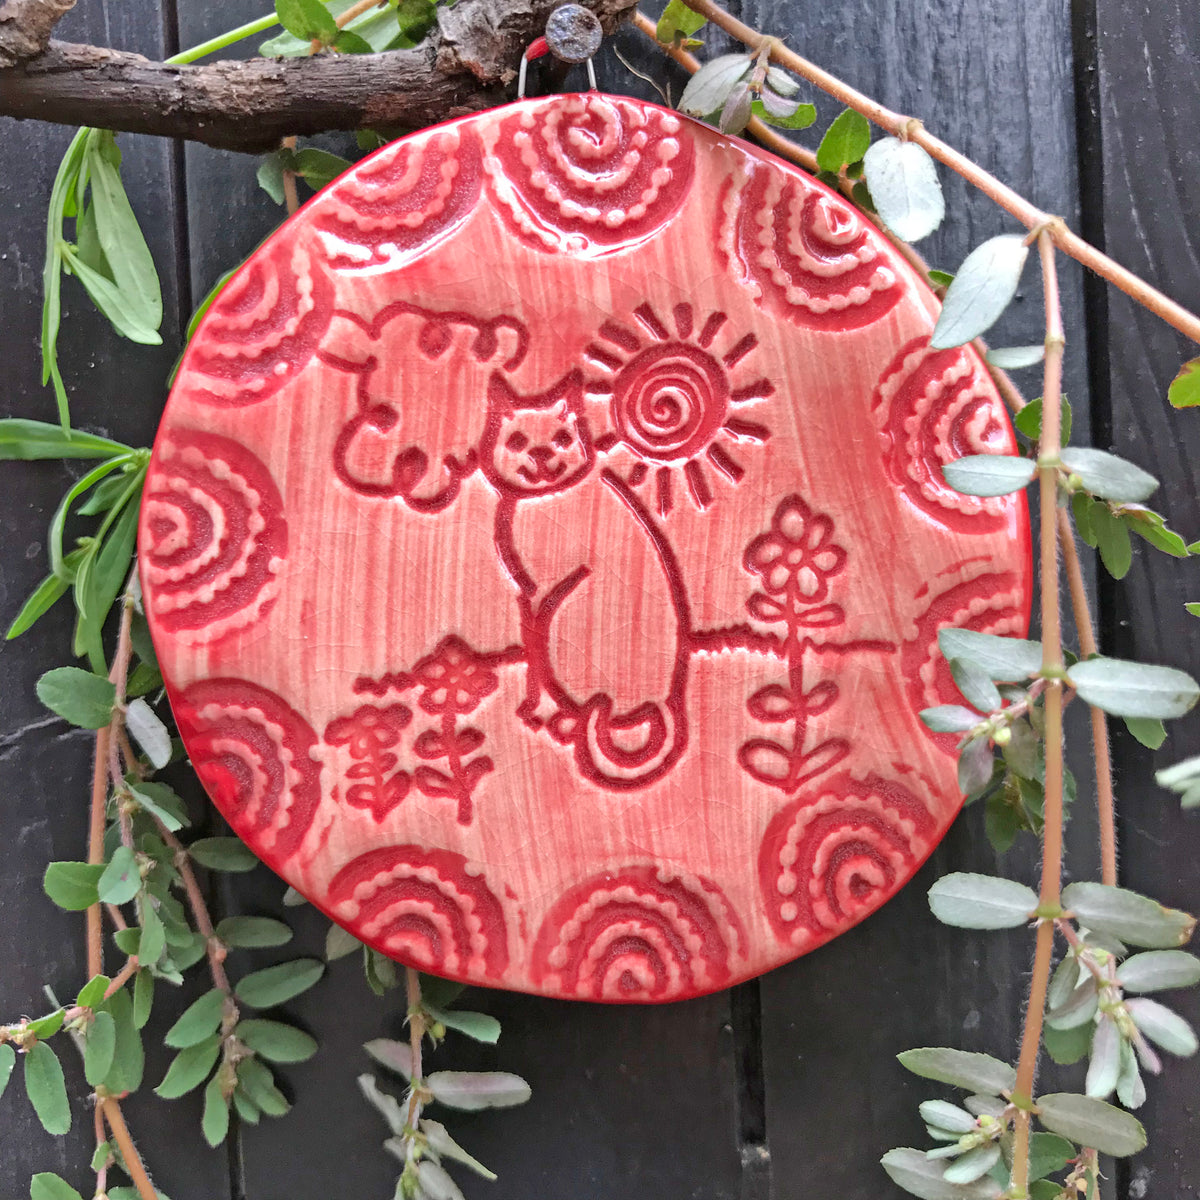 A christmas ornament for cat lovers, the Cat in the Sun design is glazed in Christmas Red.  It is a whimsical design that many people display year round.  